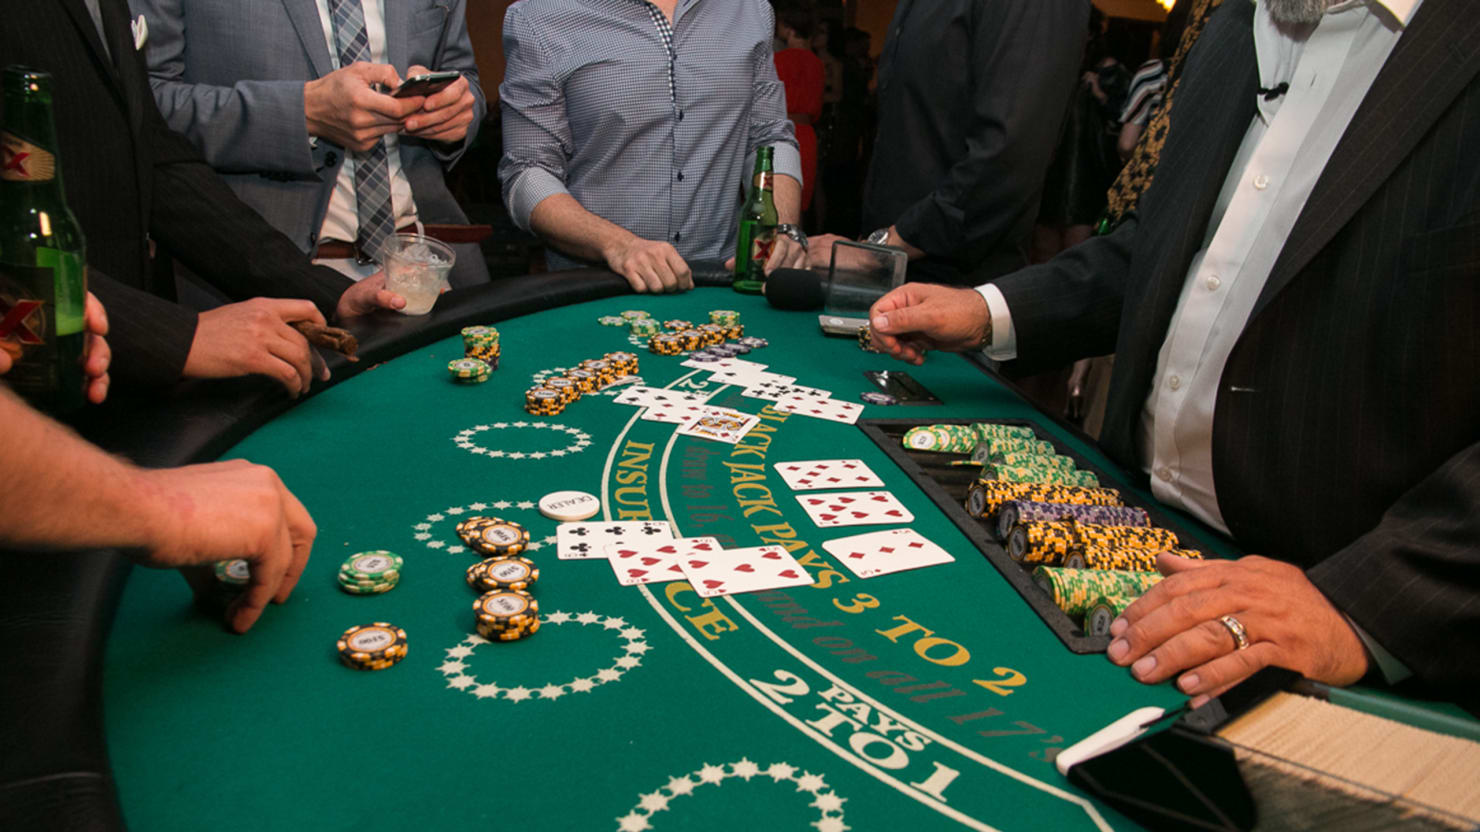 Traditional Blackjack is the only way to play the game